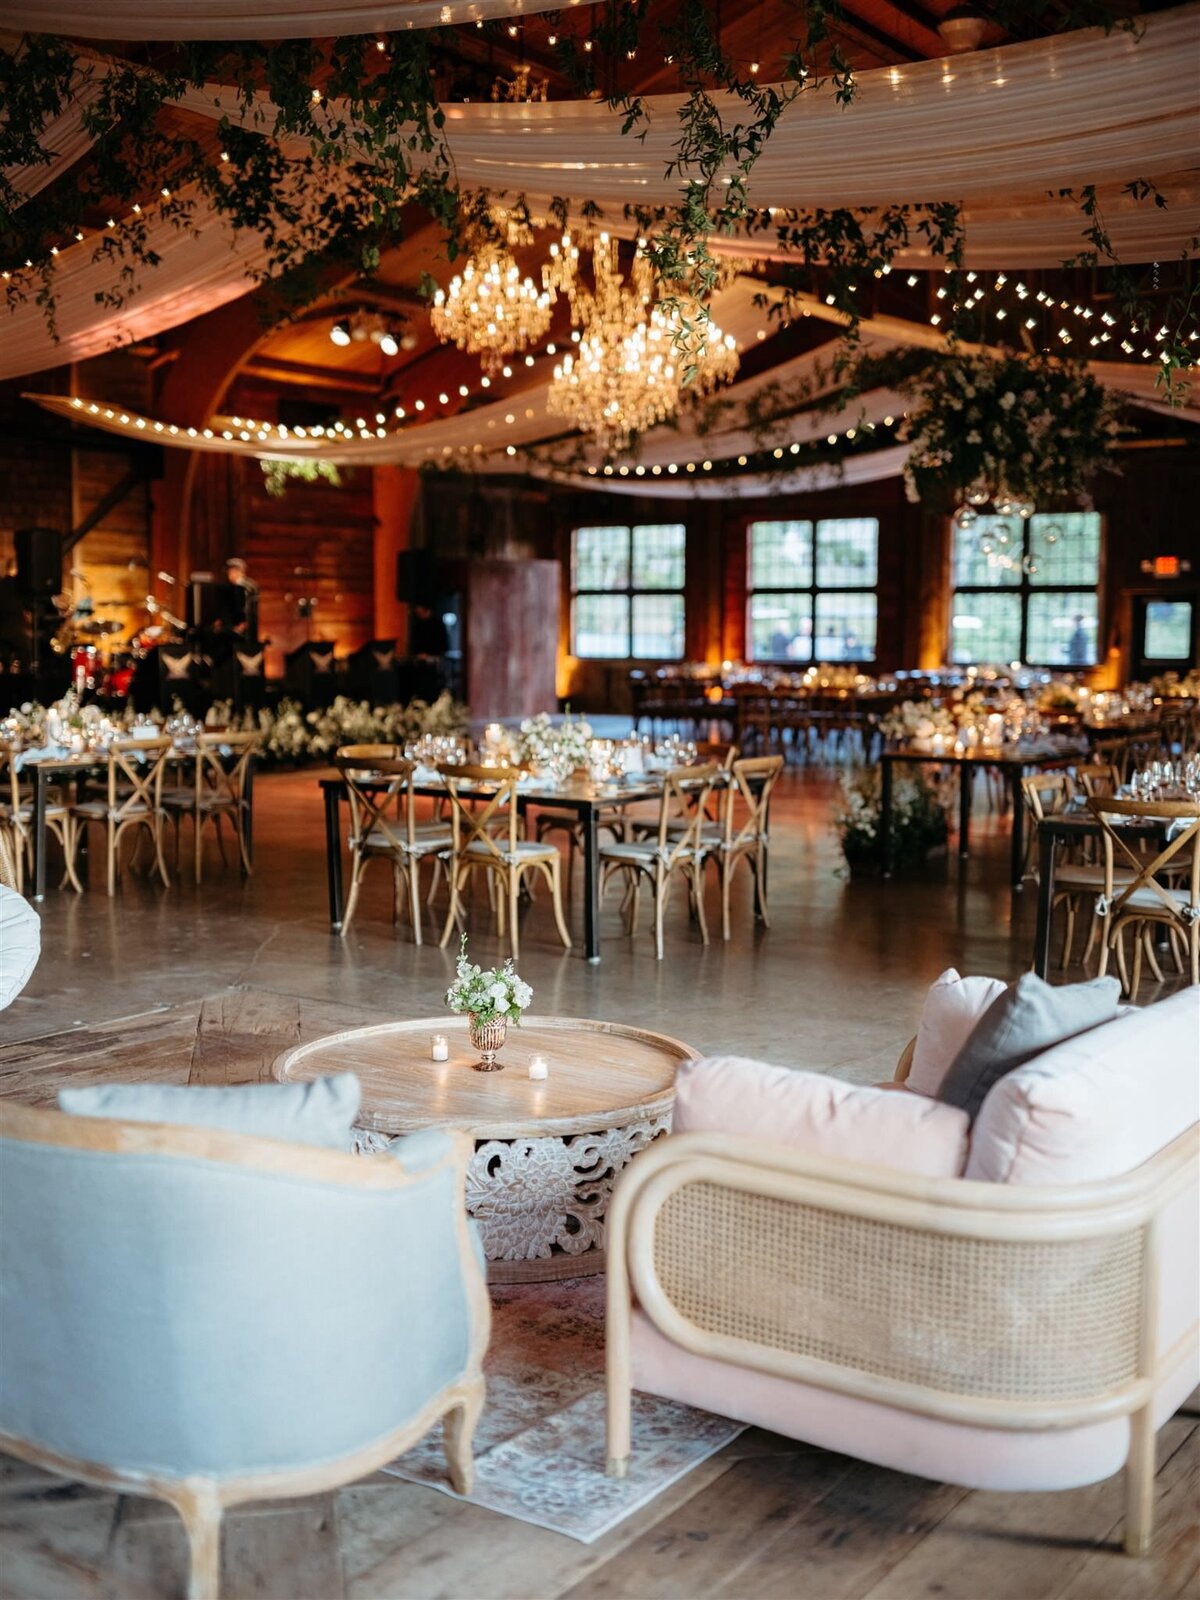 Cedar Lakes Estate wedding venue reception lounge space in front of romantic tables, natural wood crossback chairs, candle-lit tablescapes, under chandeliers, twinkle lights, draped white fabric, and botanical swags.